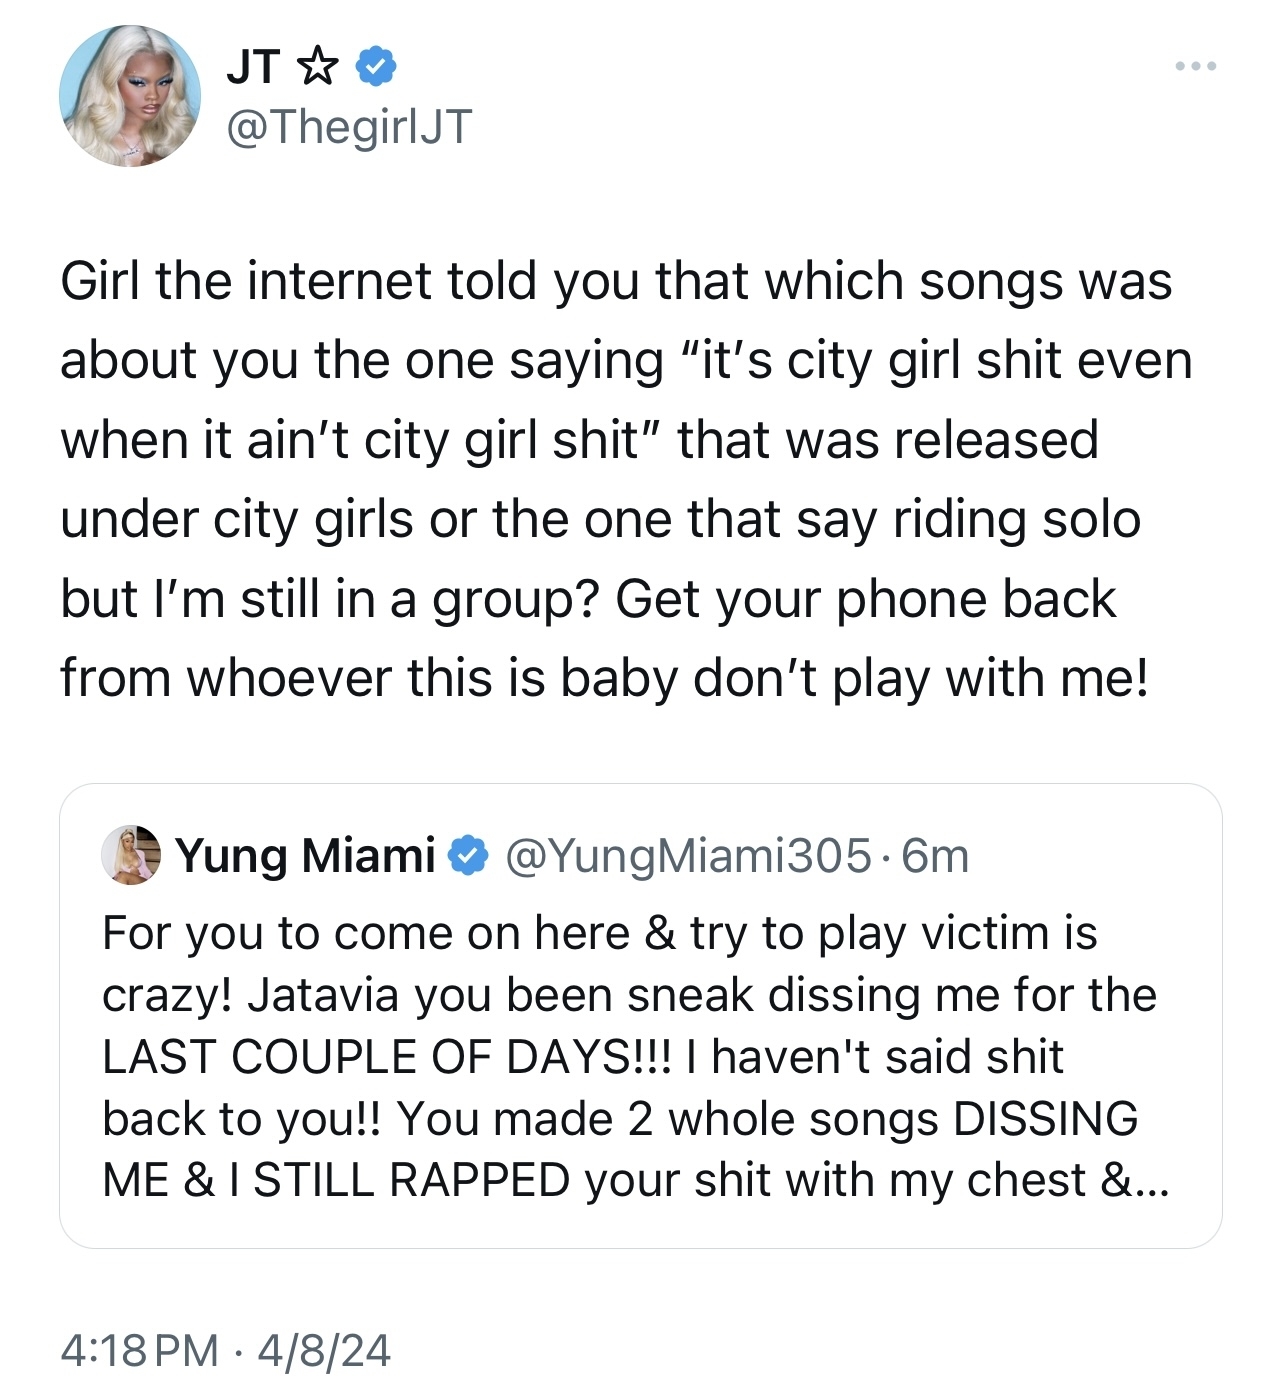 Tweet exchange between @ThegirlJT and @YungMiami305 discussing their music and a rumor, showing a strong bond despite controversy